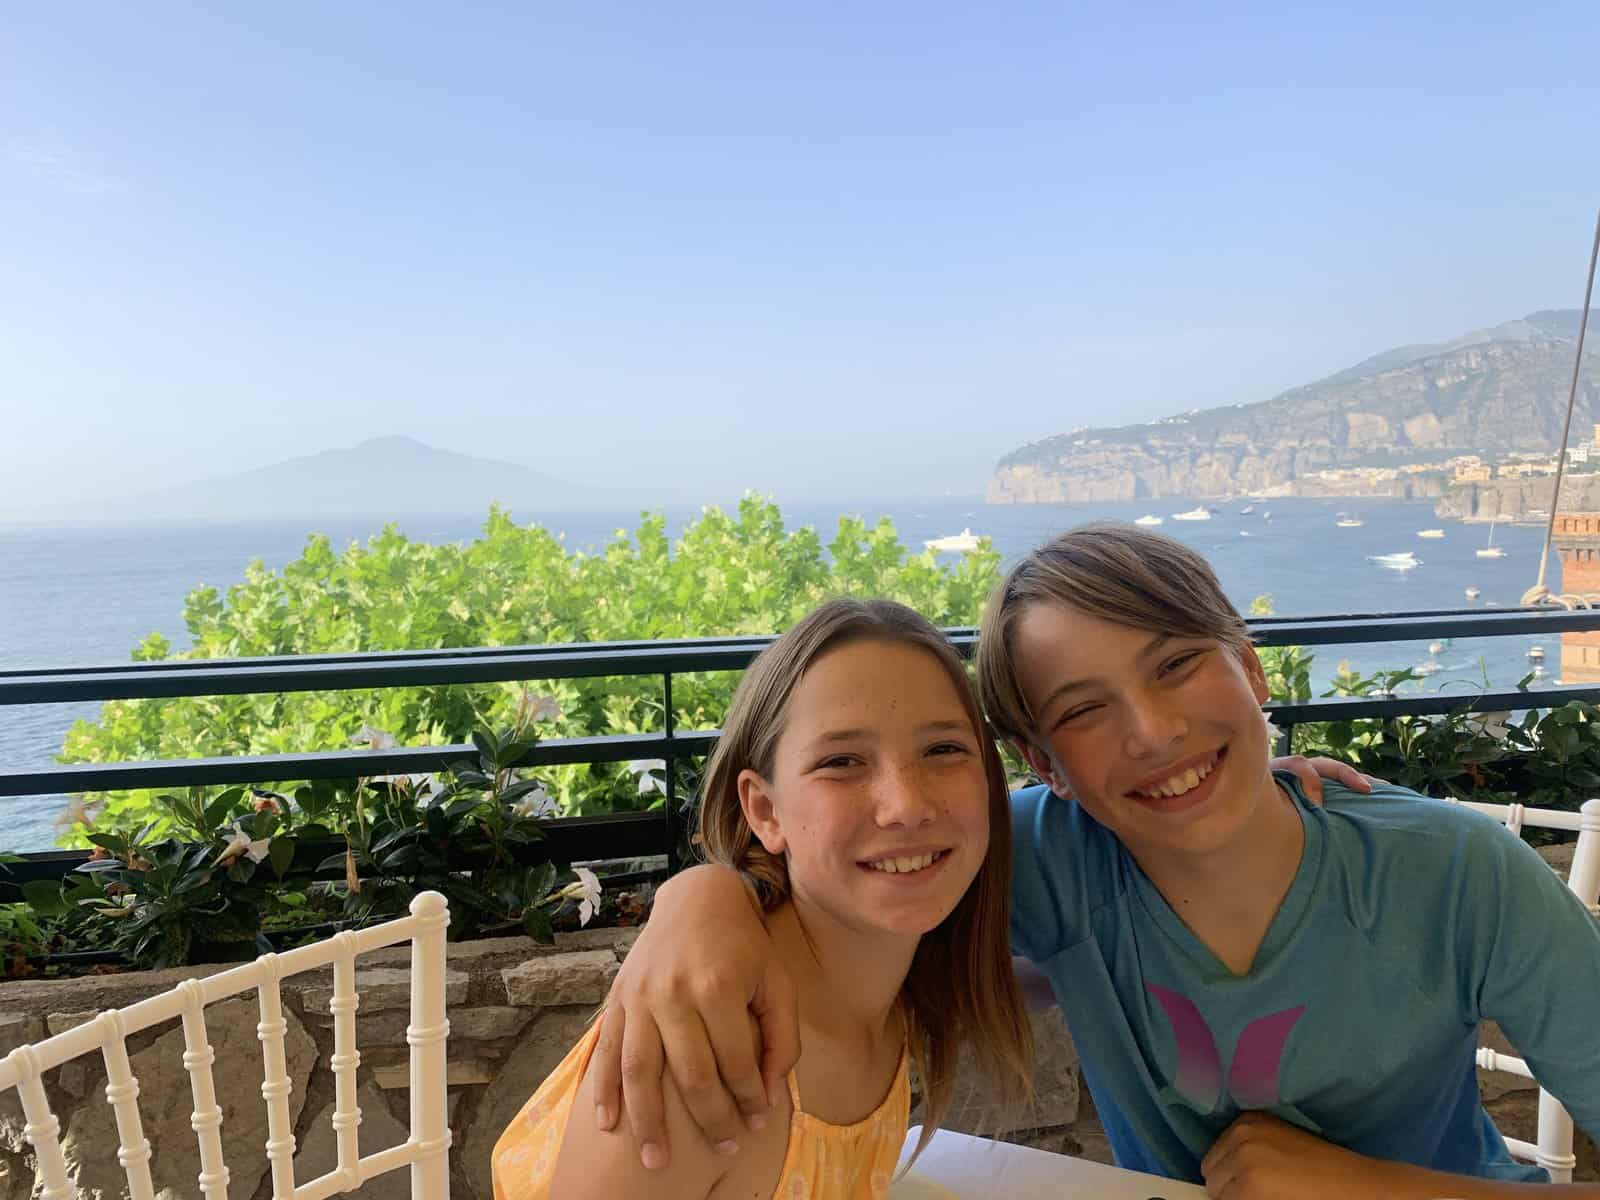 Miss E & CJ smiling at a gluten-free Italy restaurant table with a view of the bay of Naples in the background